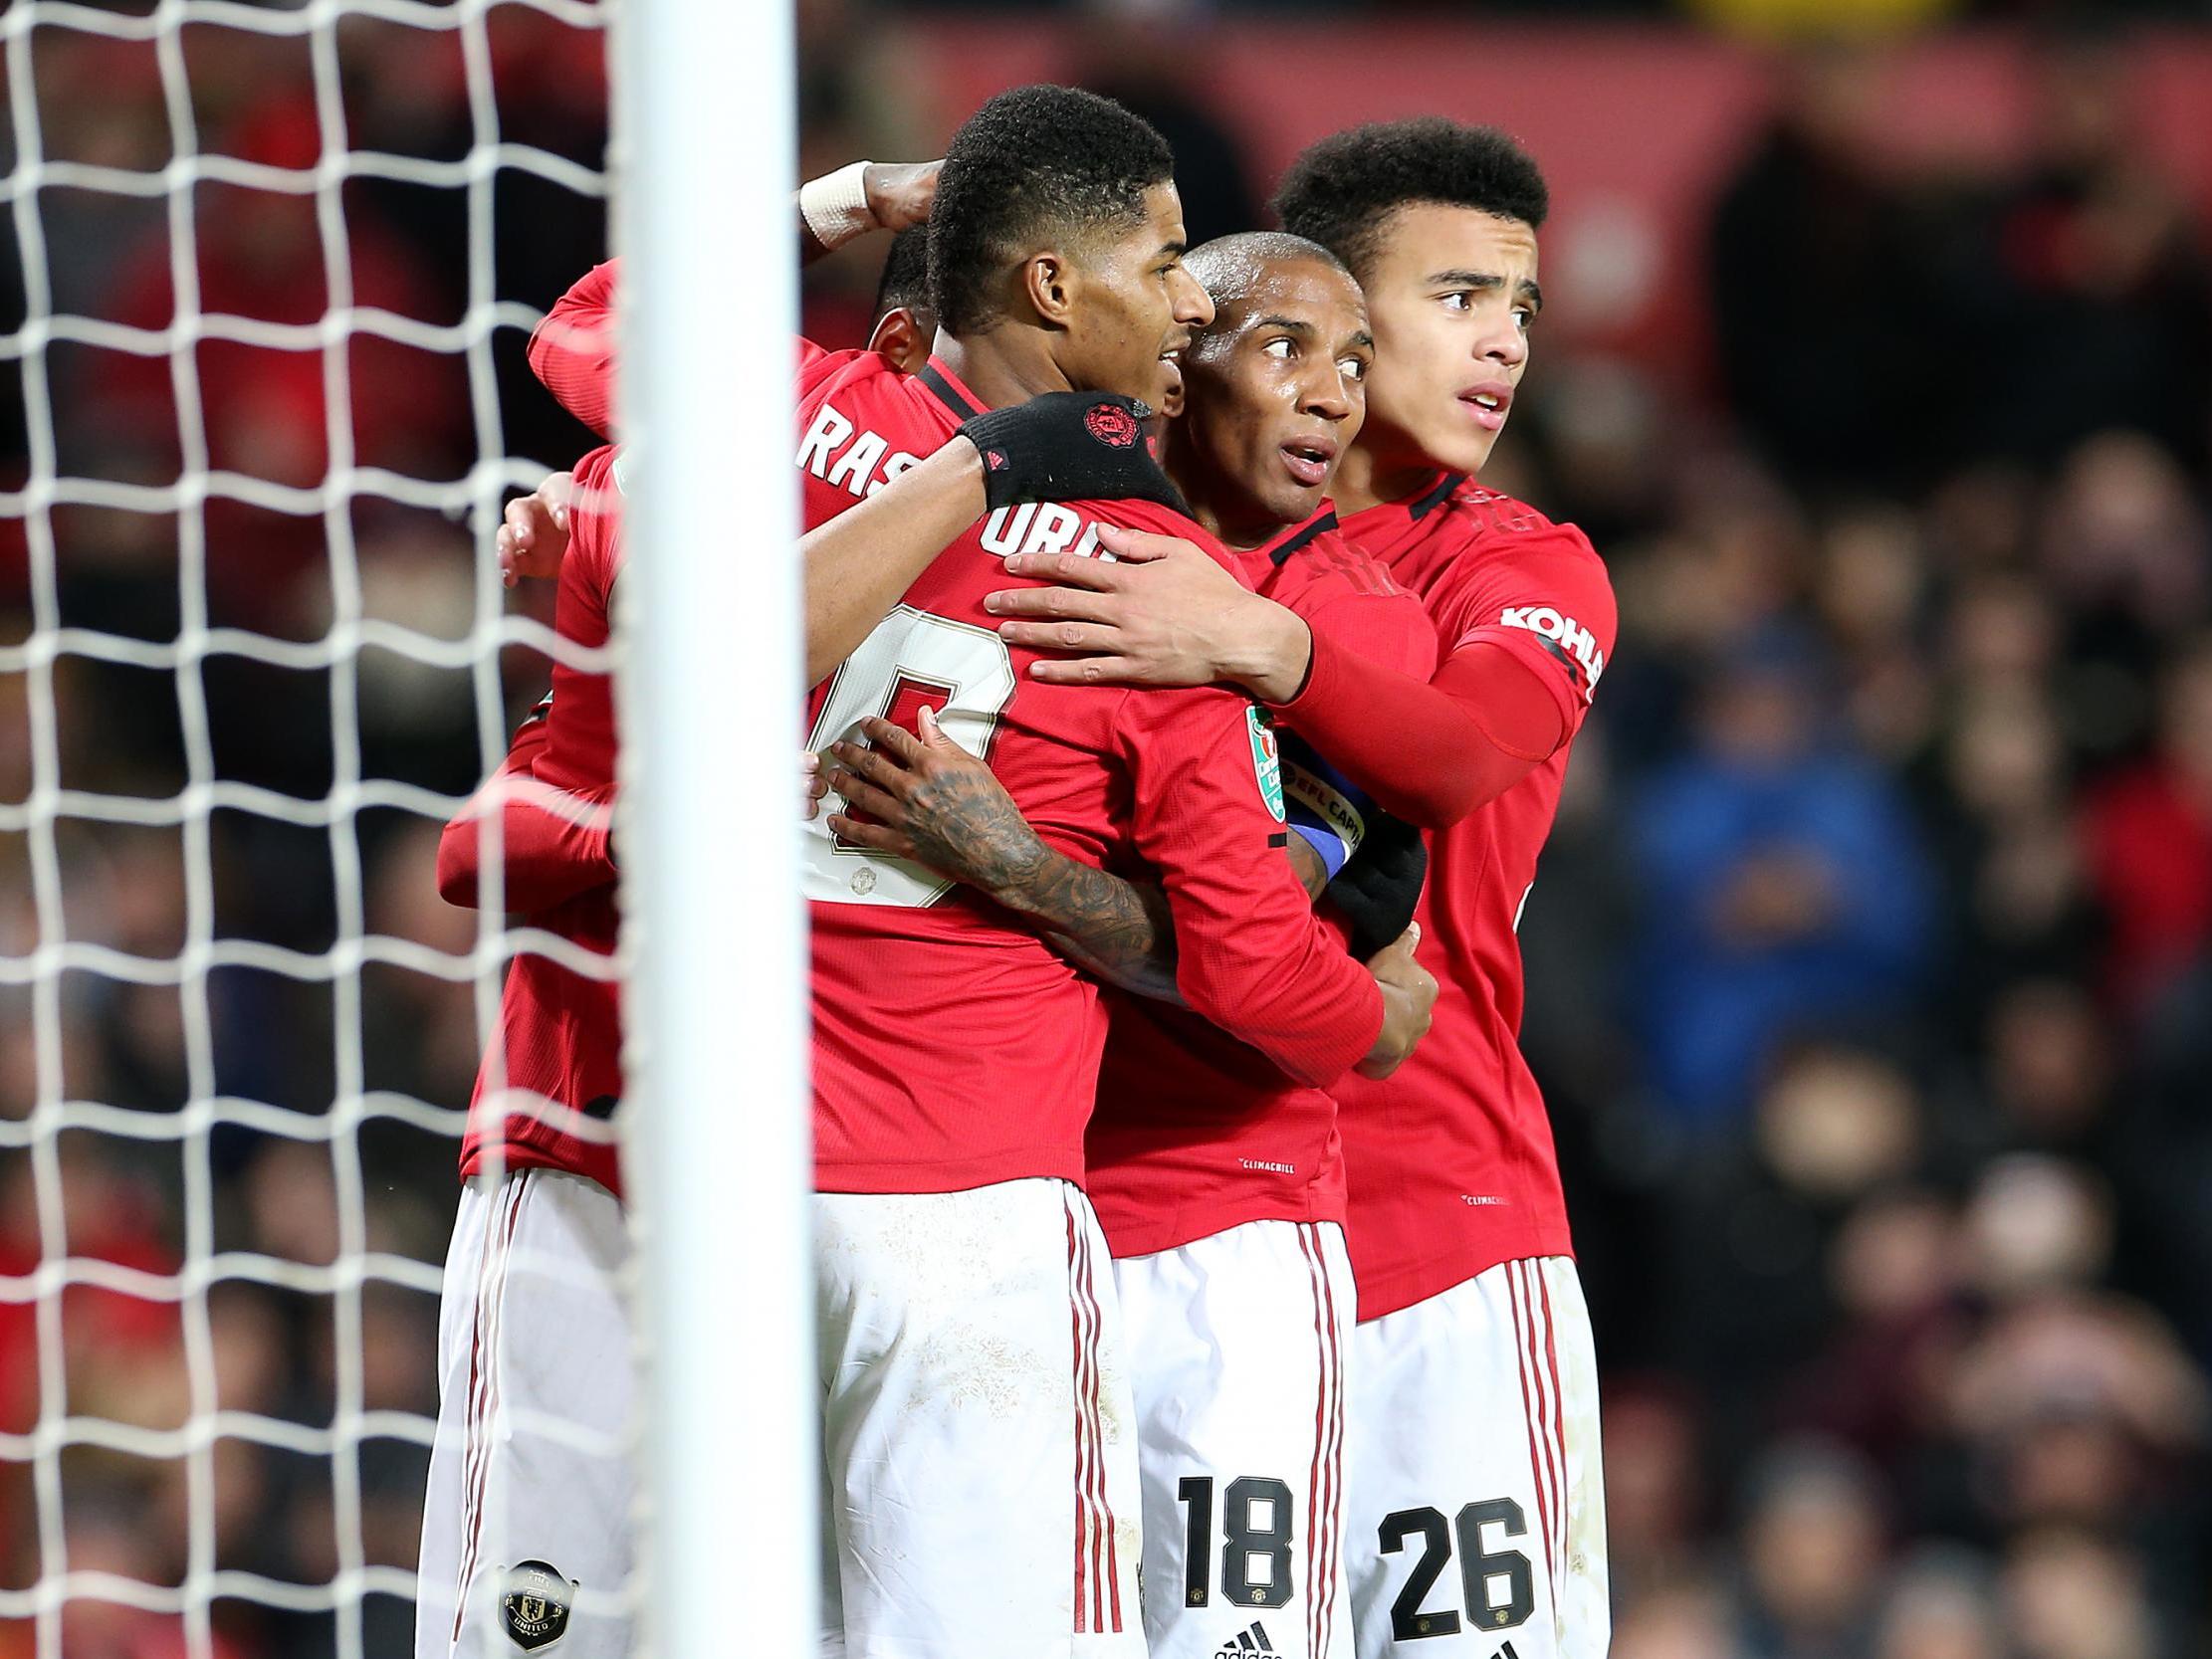 Manchester United celebrate their third goal against Colchester